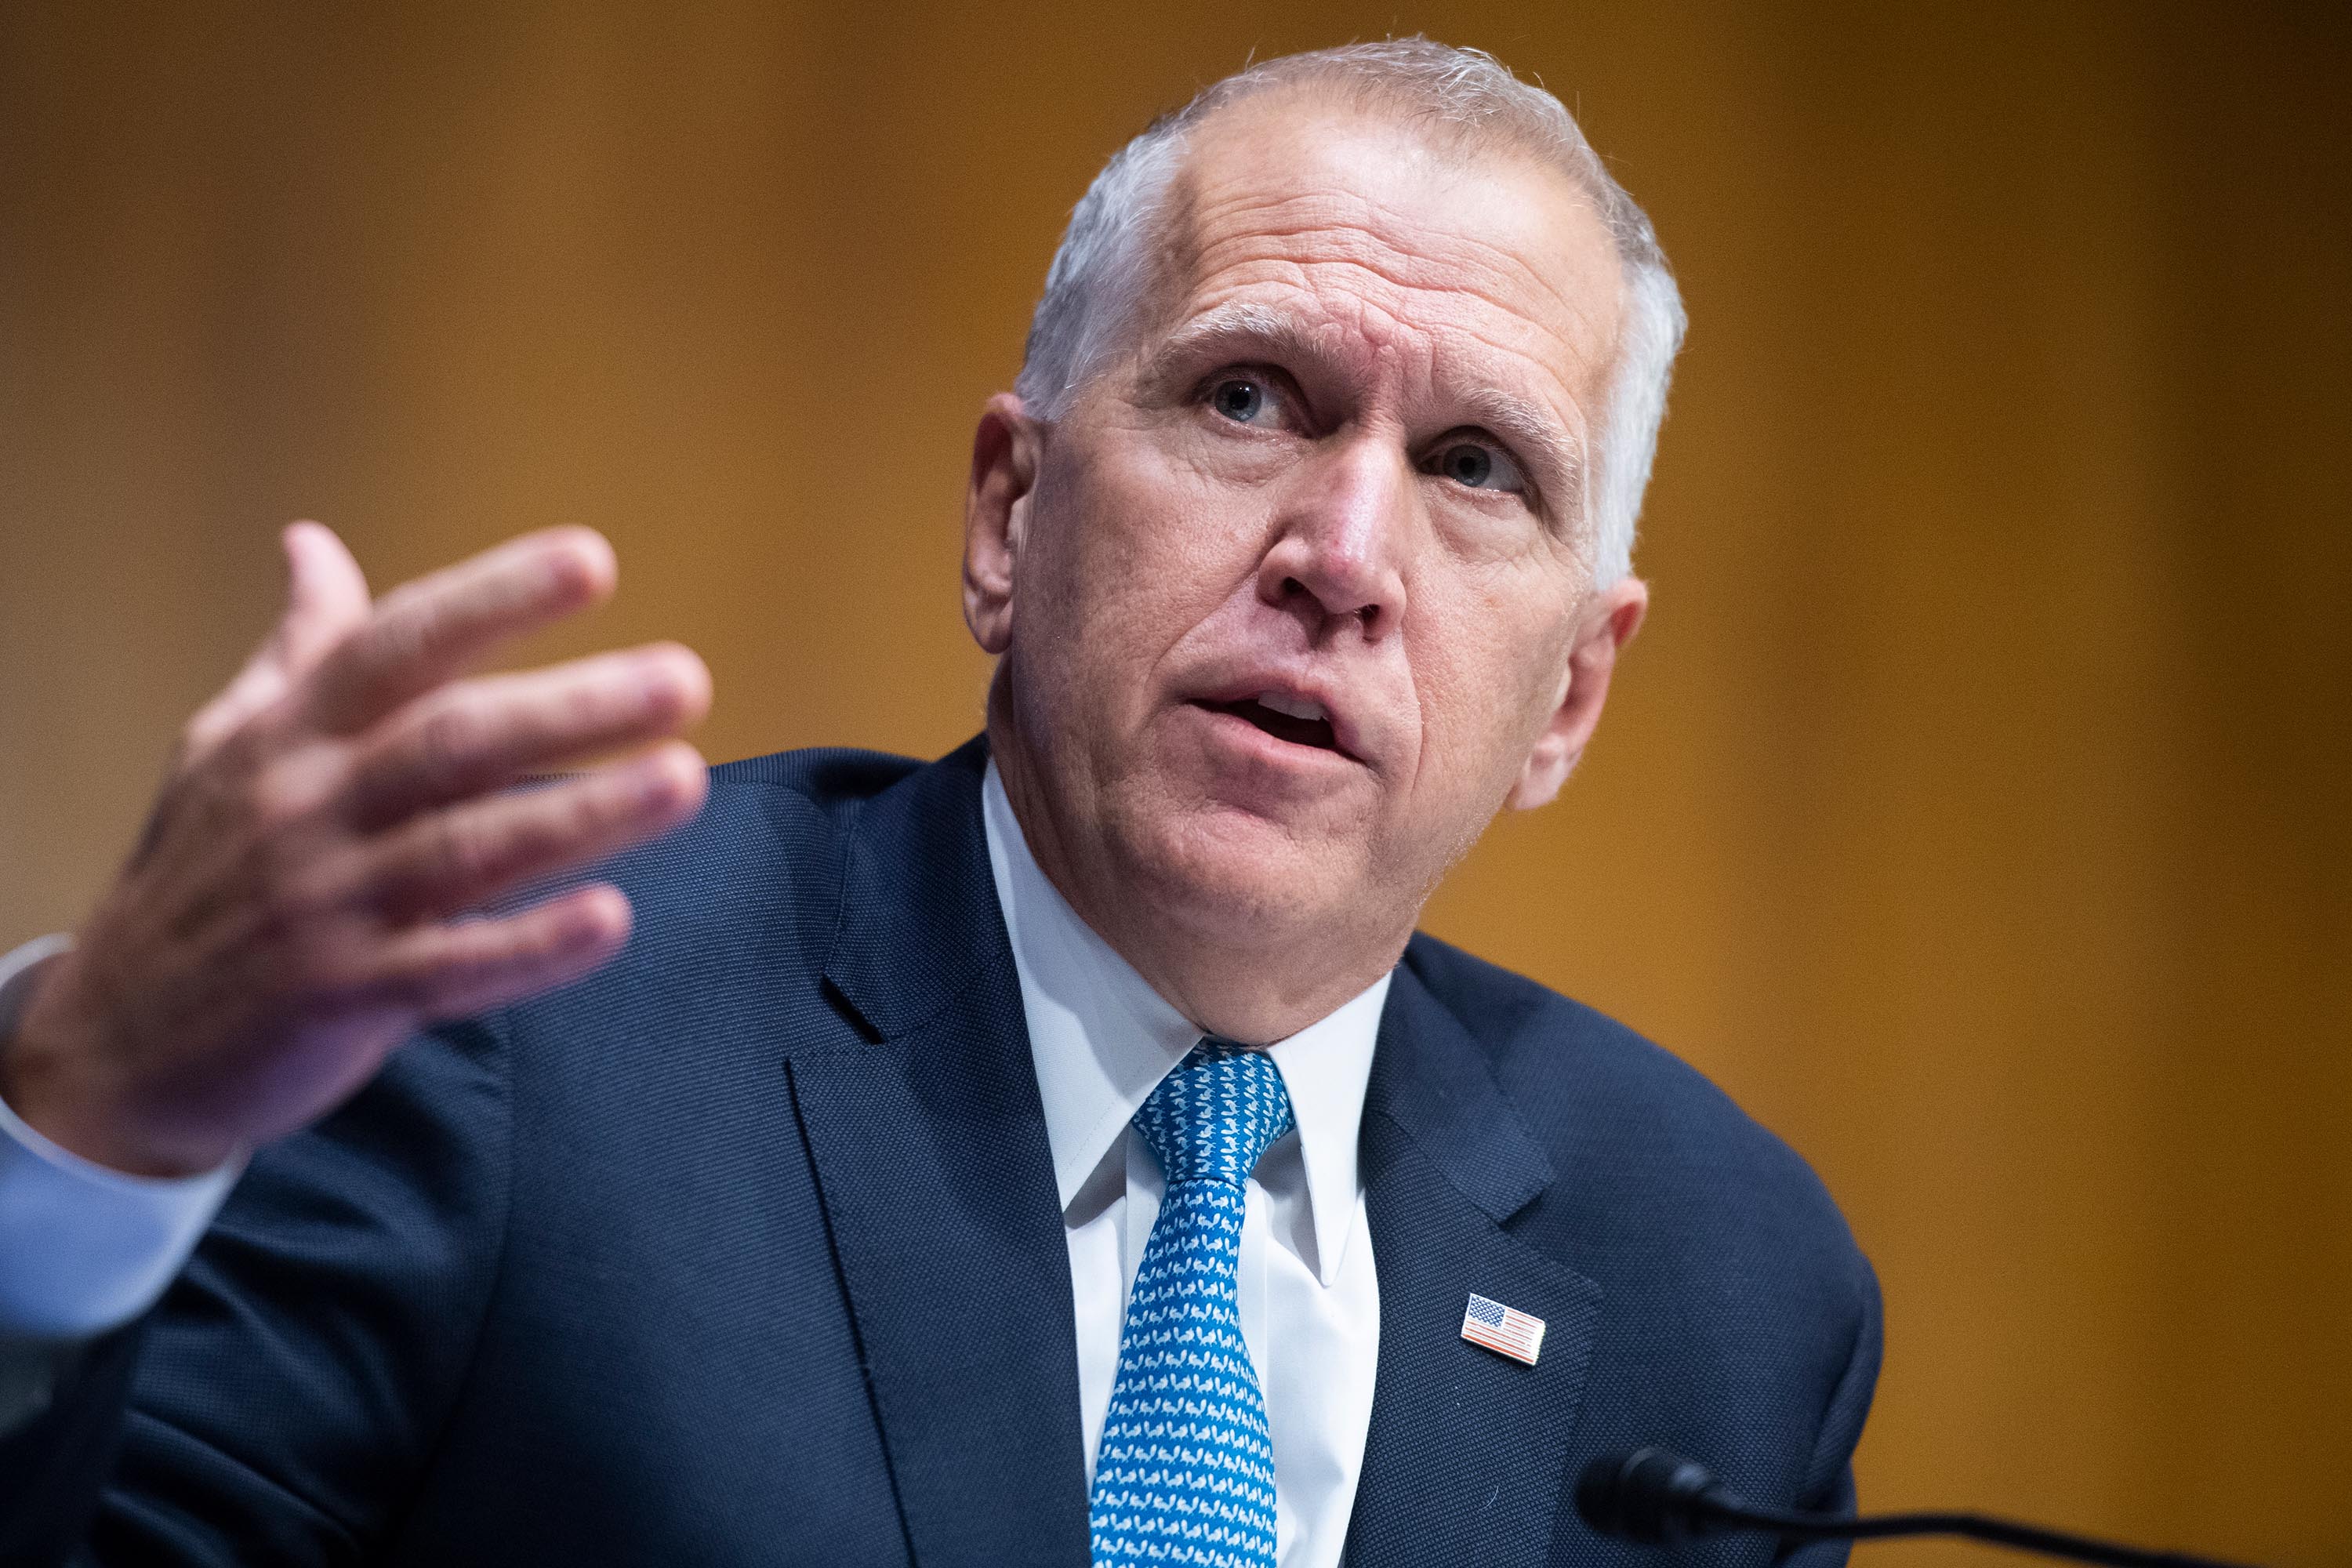 Sen. Thom Tillis asks a question during a Judiciary Committee hearing on June 16, 2020 in Washington, DC.